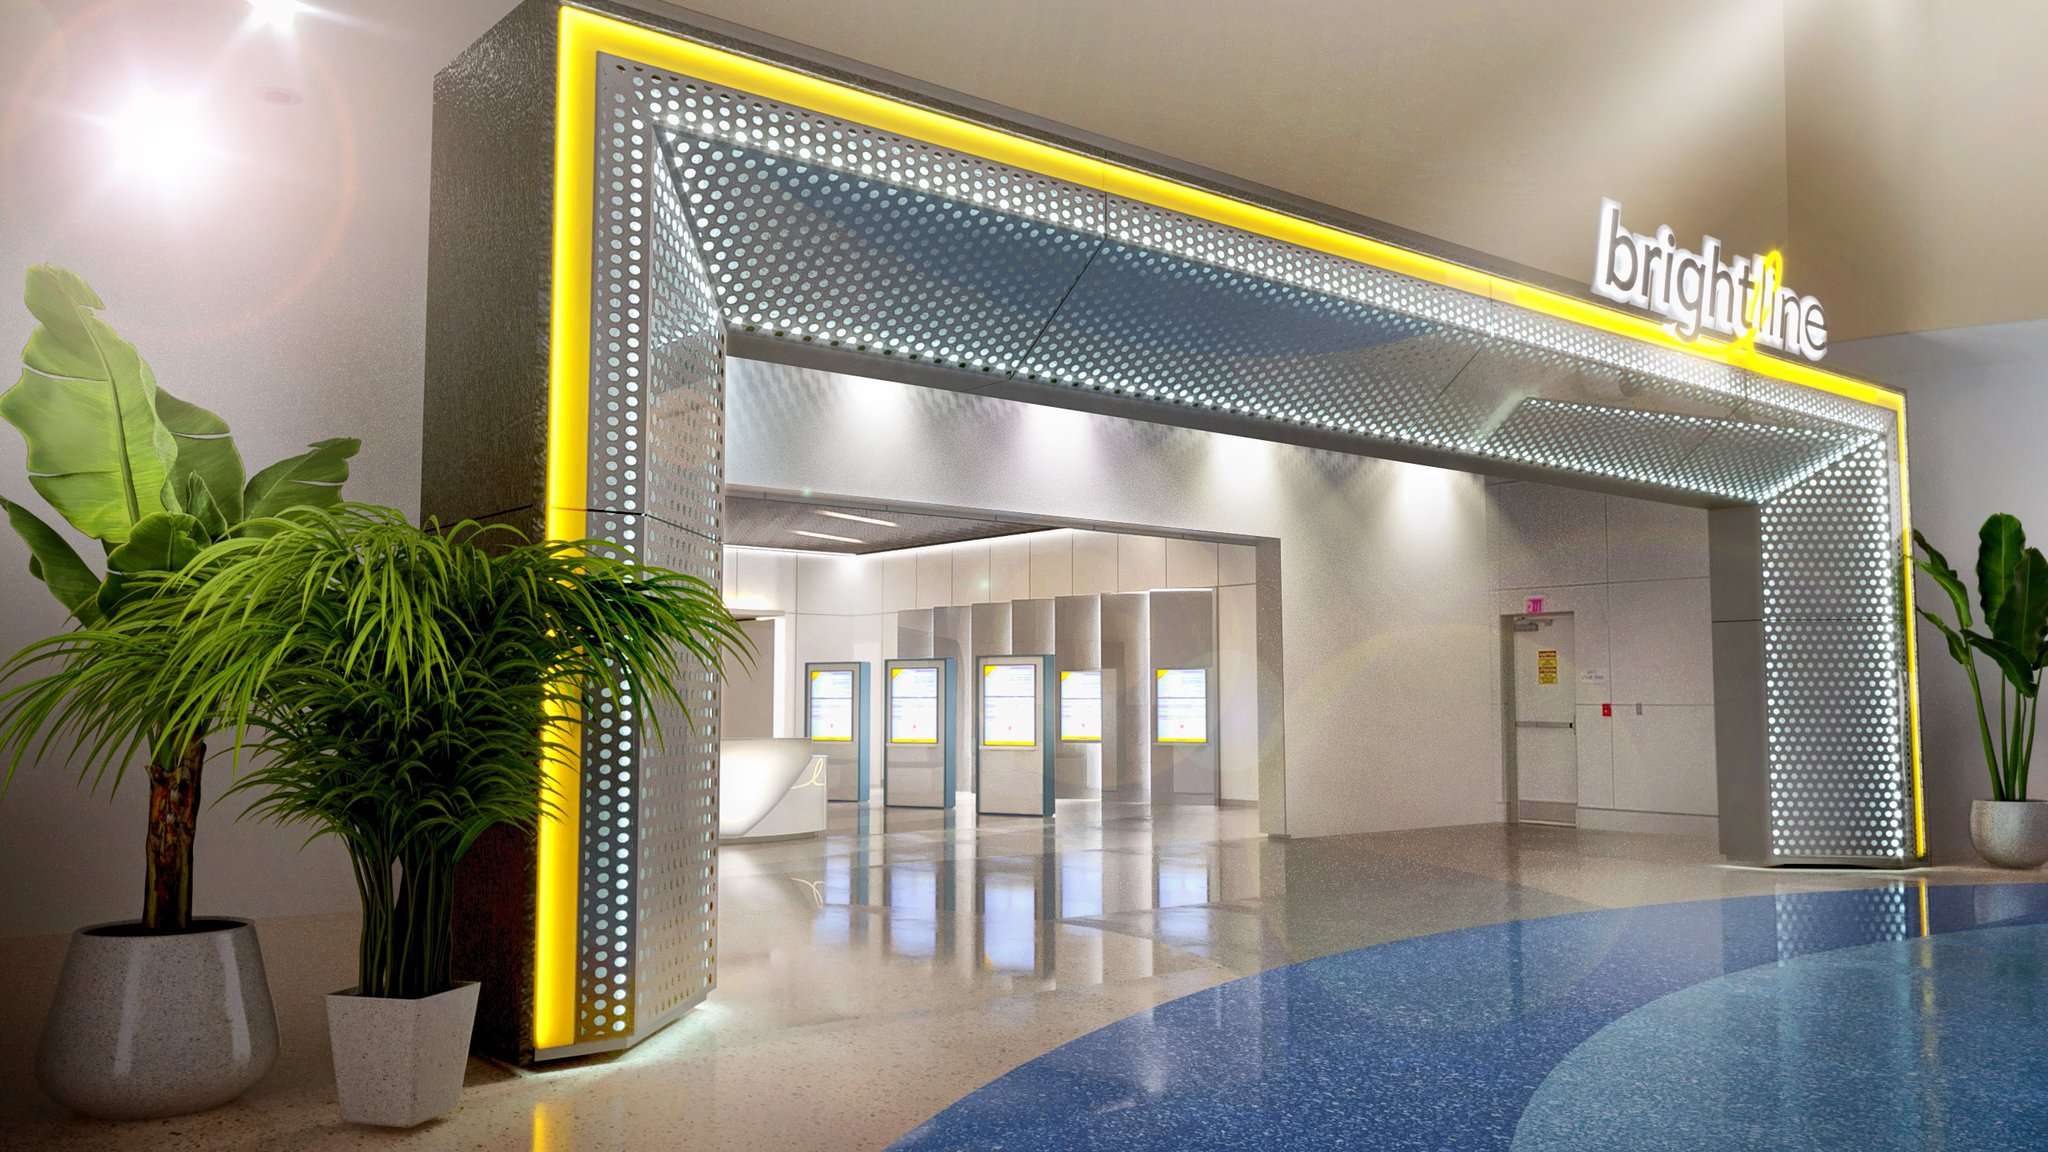 ORLANDO WELCOMES THE BRIGHTLINE TRAIN STATION AT MCO